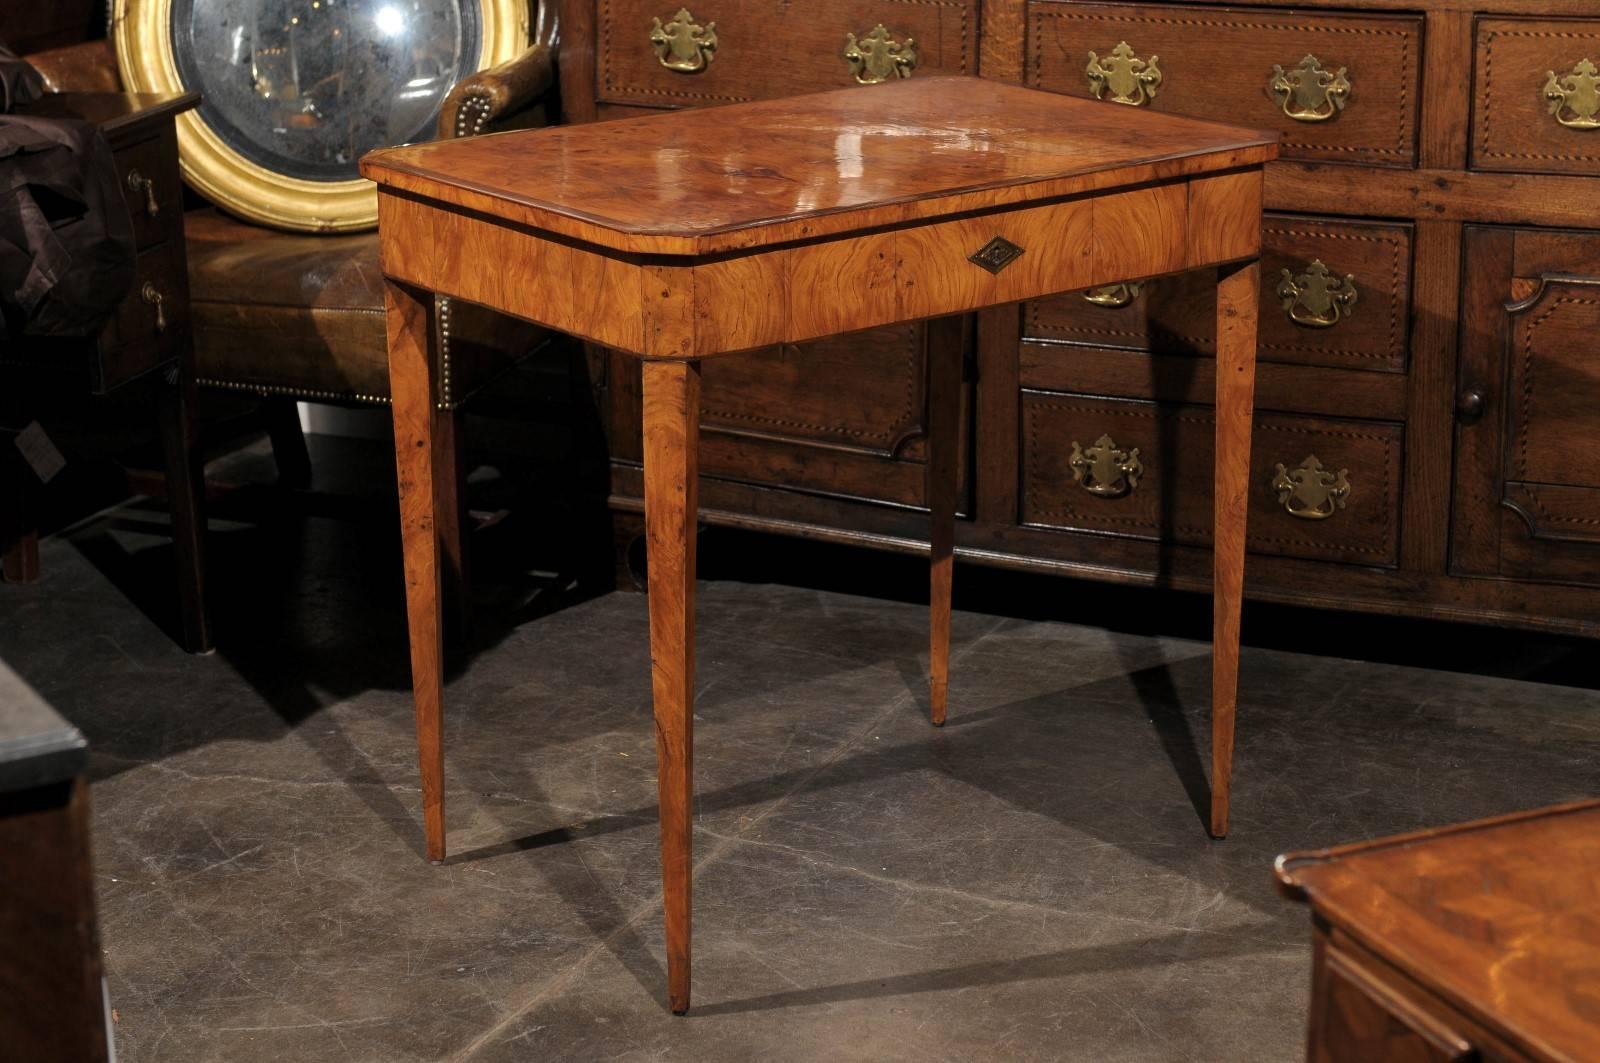 This 19th century Austrian Biedermeier wood table features a rectangular planked top with cross-banded inlay of darker wood surrounding the rim and canted corners. A diamond-shaped brass keyhole escutcheon compliments the center of the dovetailed